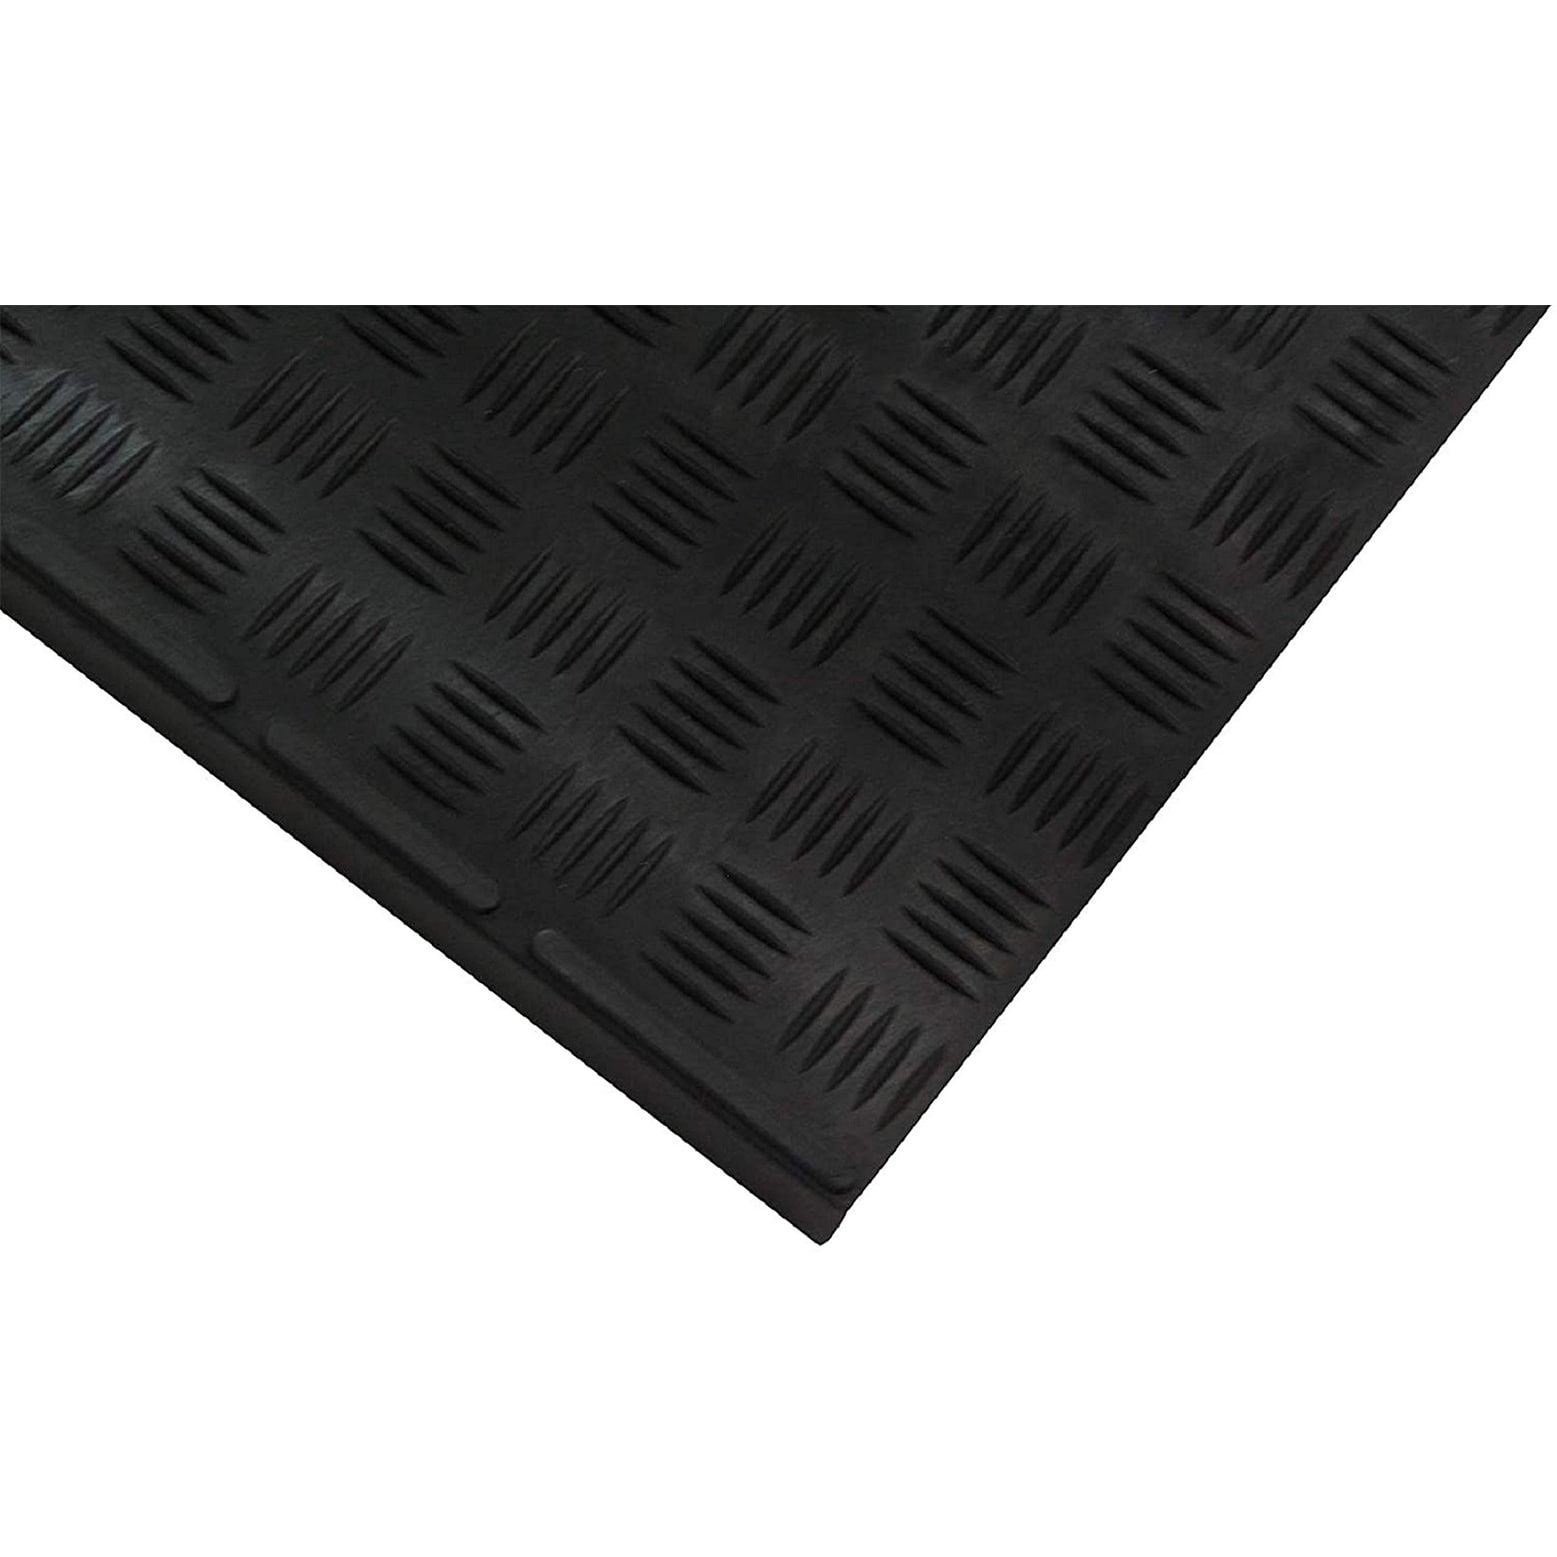 https://ak1.ostkcdn.com/images/products/is/images/direct/c74426cdeb71e63cbb3800e9bdbee23b4c4fdcd9/Envelor-Indoor-Outdoor-Non-Slip-Step-Mats-Stair-Treads-Rubber-Step-Mats---6-Pack.jpg